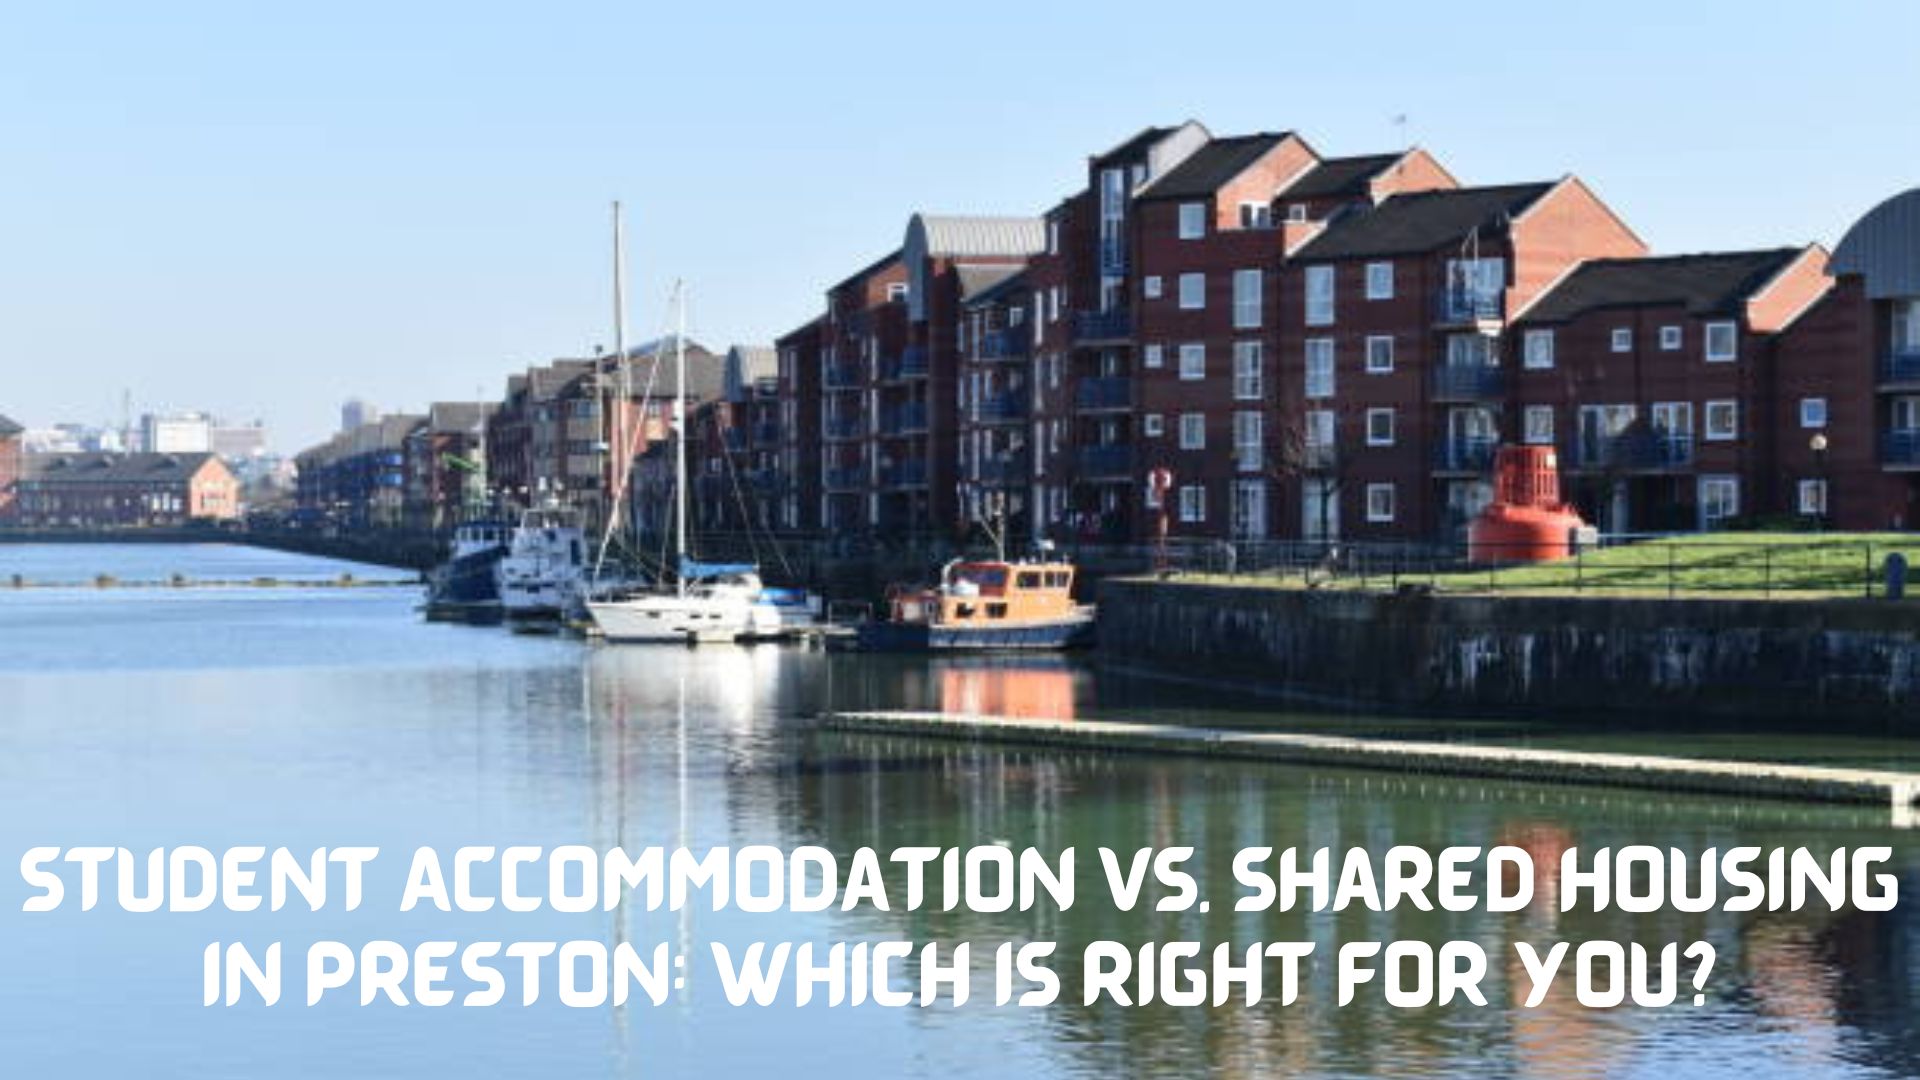 Student Accommodation vs. Shared Housing in Preston: Which is Right for You?